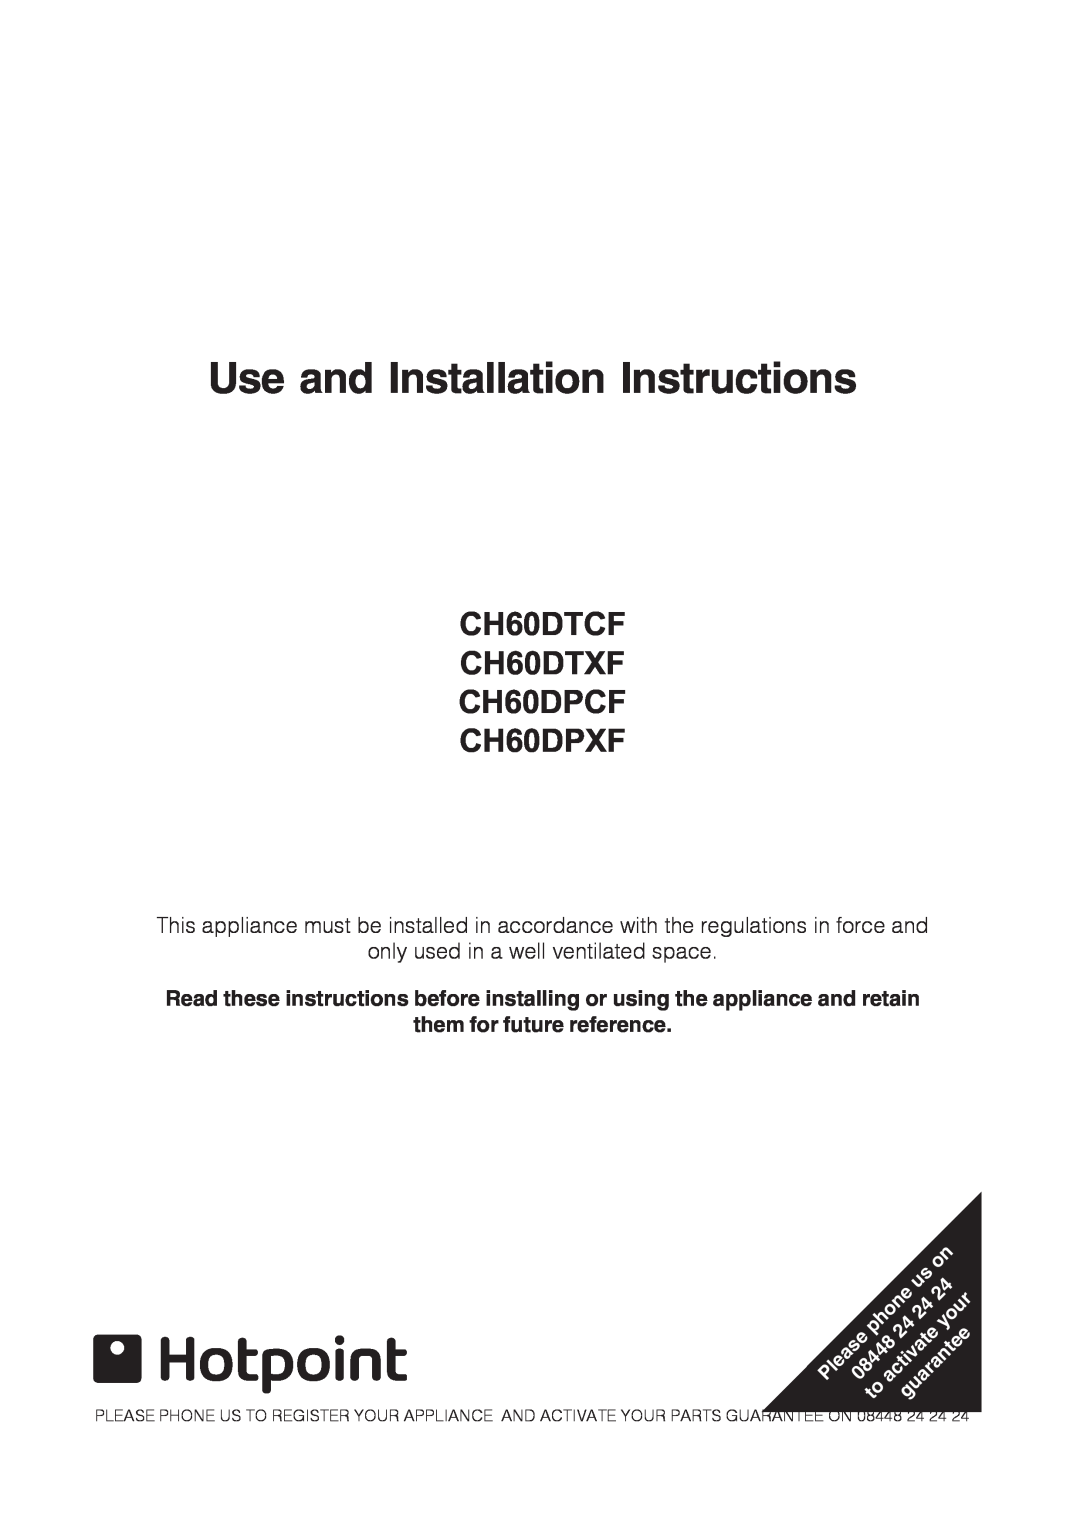 Xerox CH60DTCF installation instructions Use and Installation Instructions, them for future reference, phone, your 